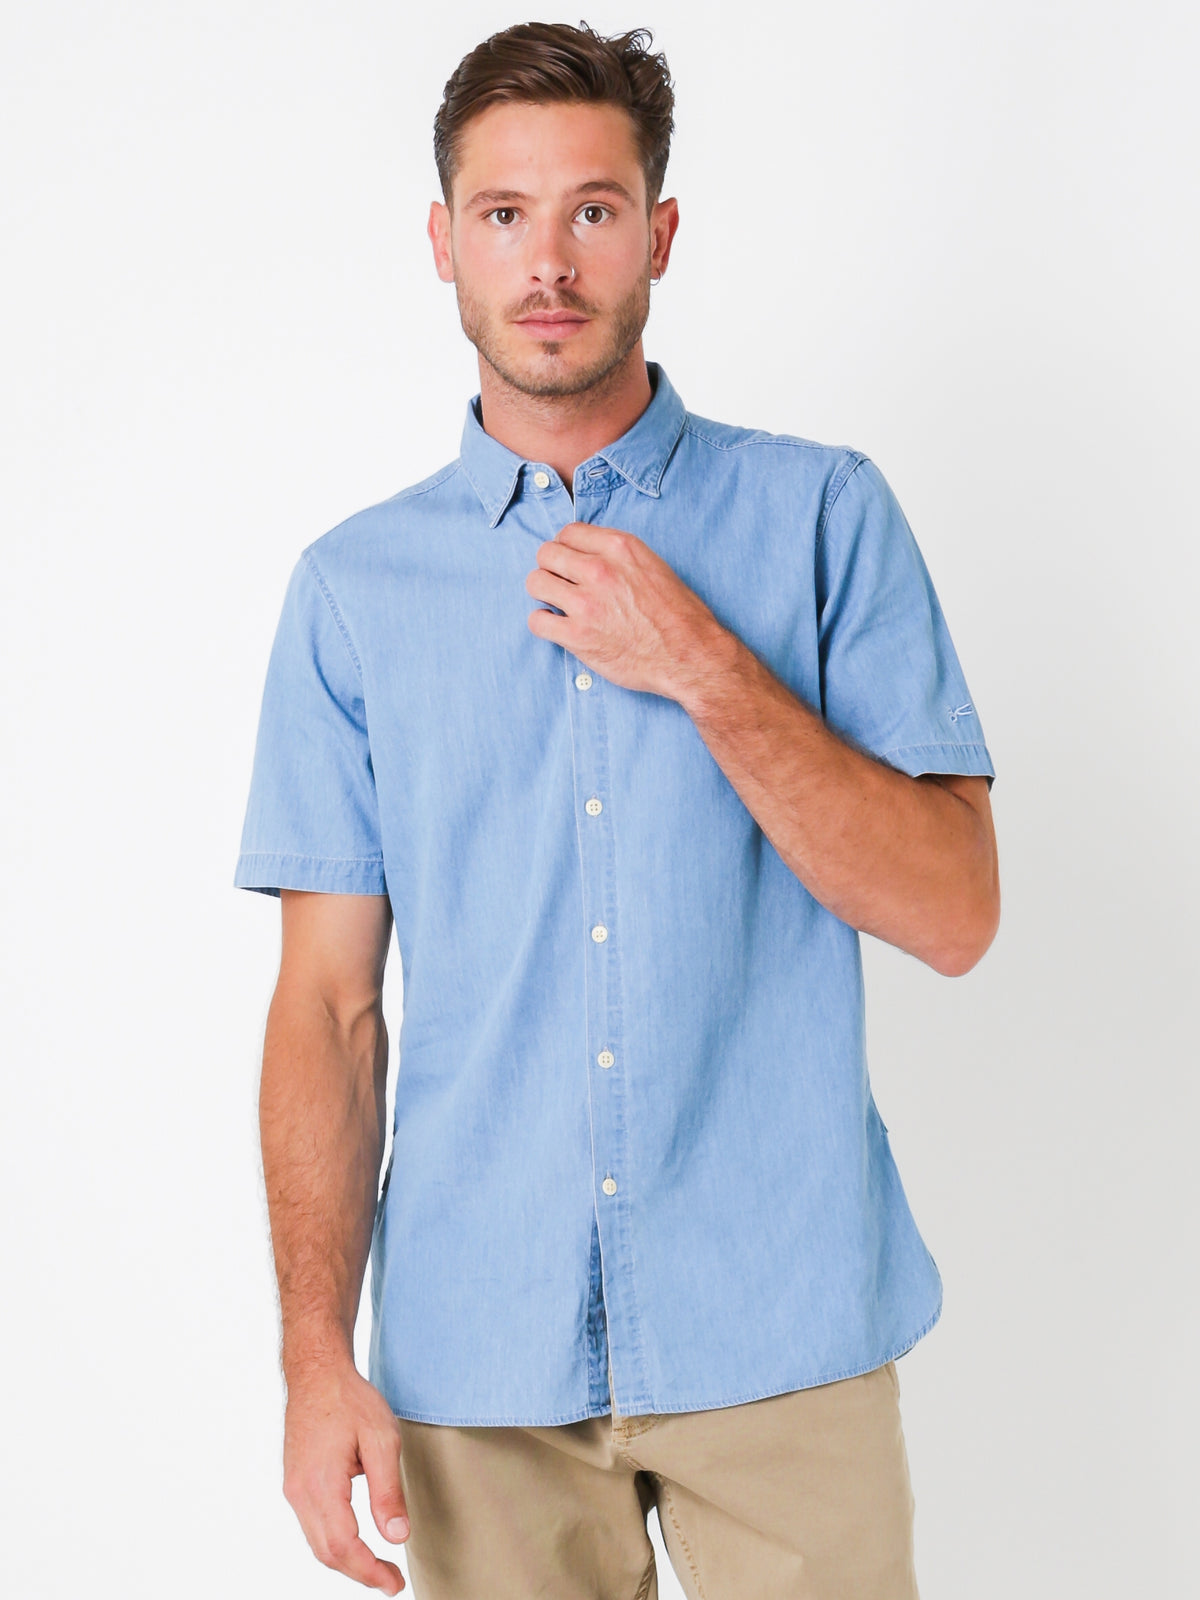 Aires Short Sleeve Shirt in Washed Chambray